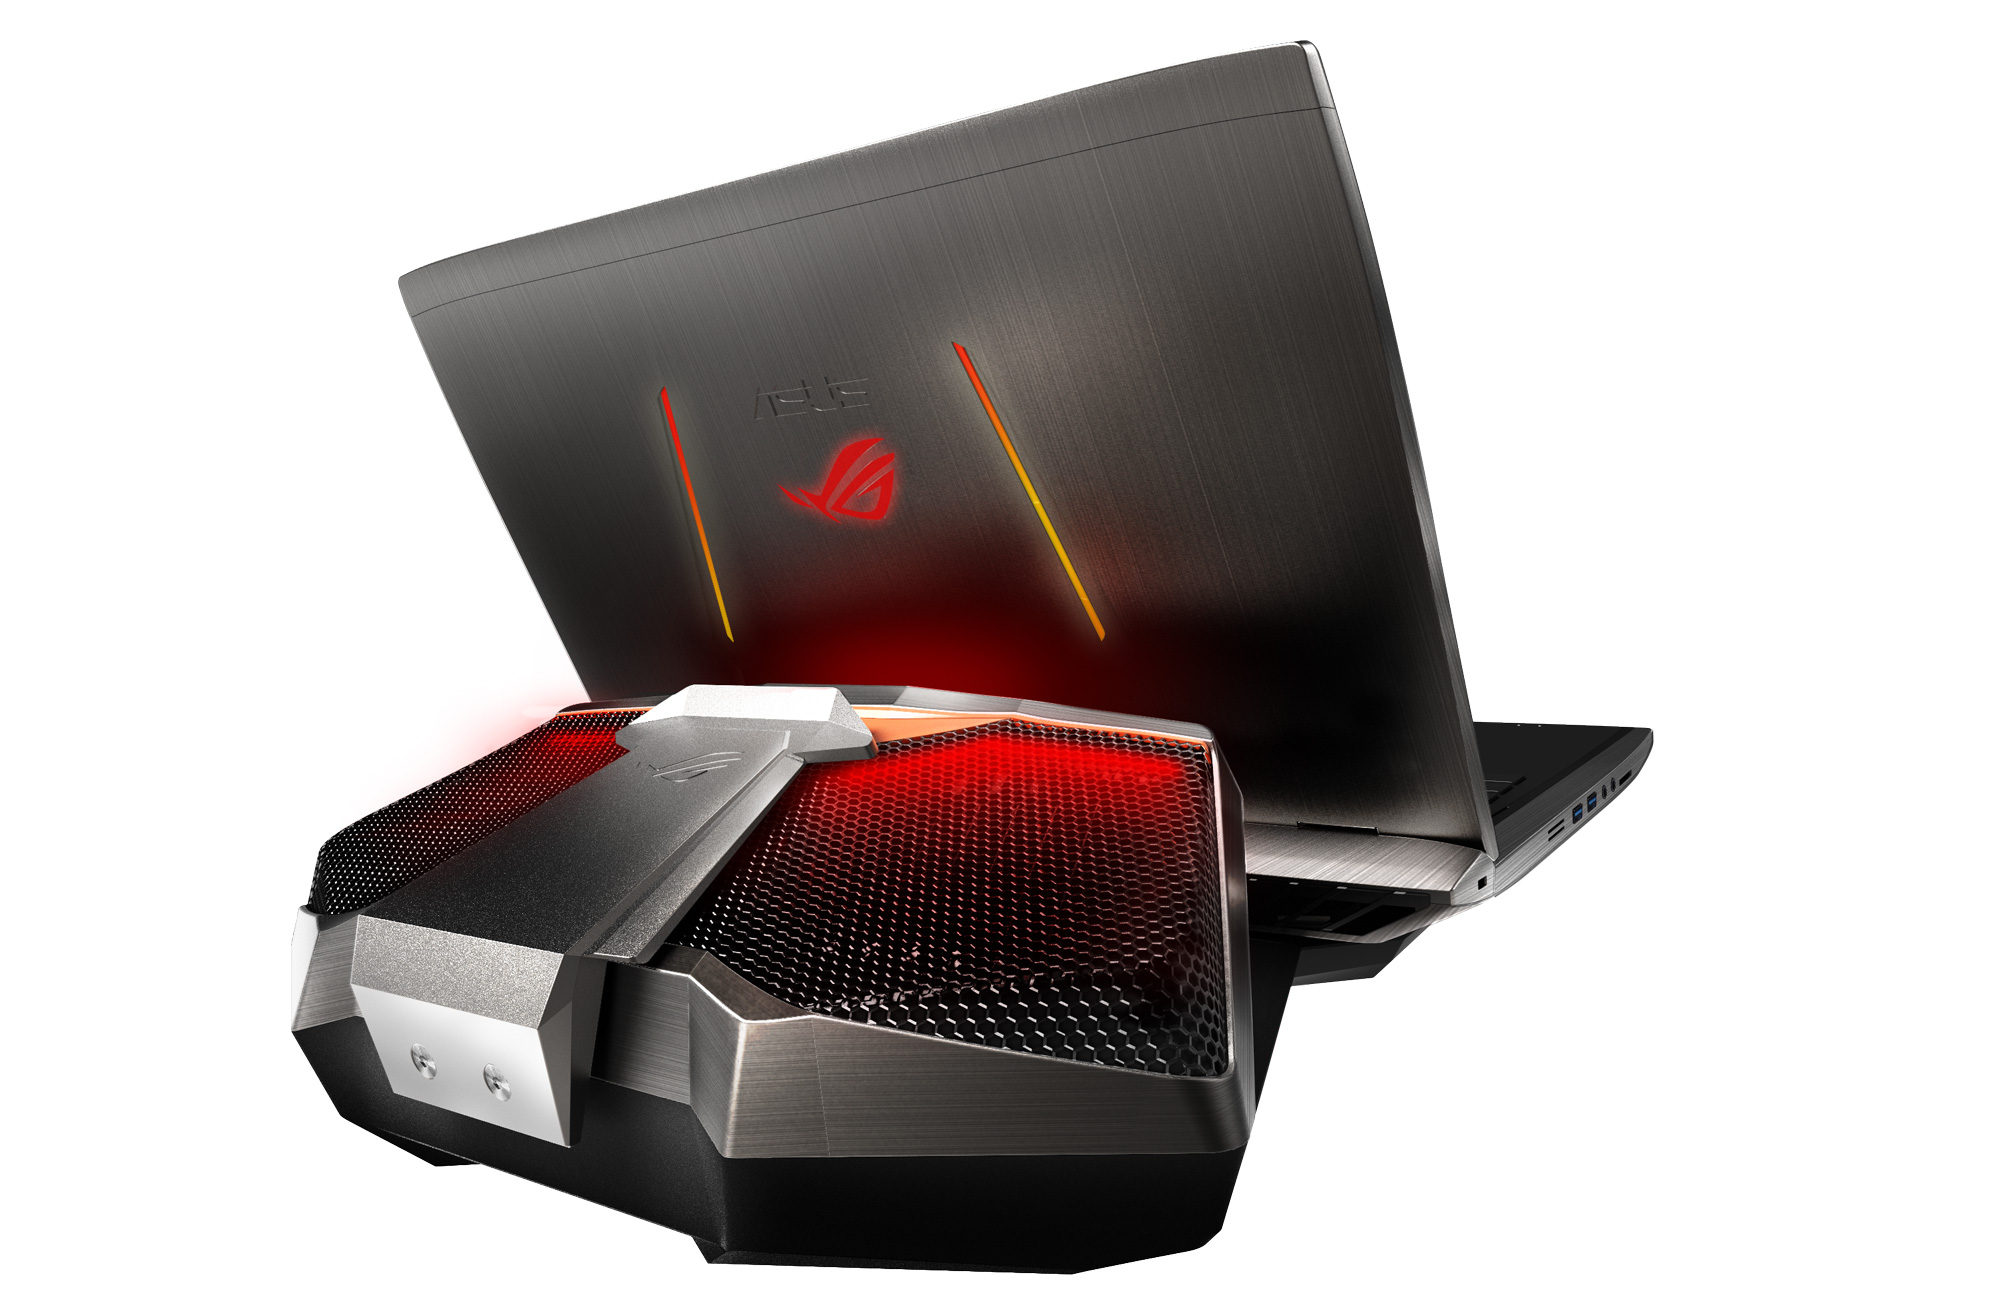 ASUS ROG unveils new lineup at IFA 2015 24